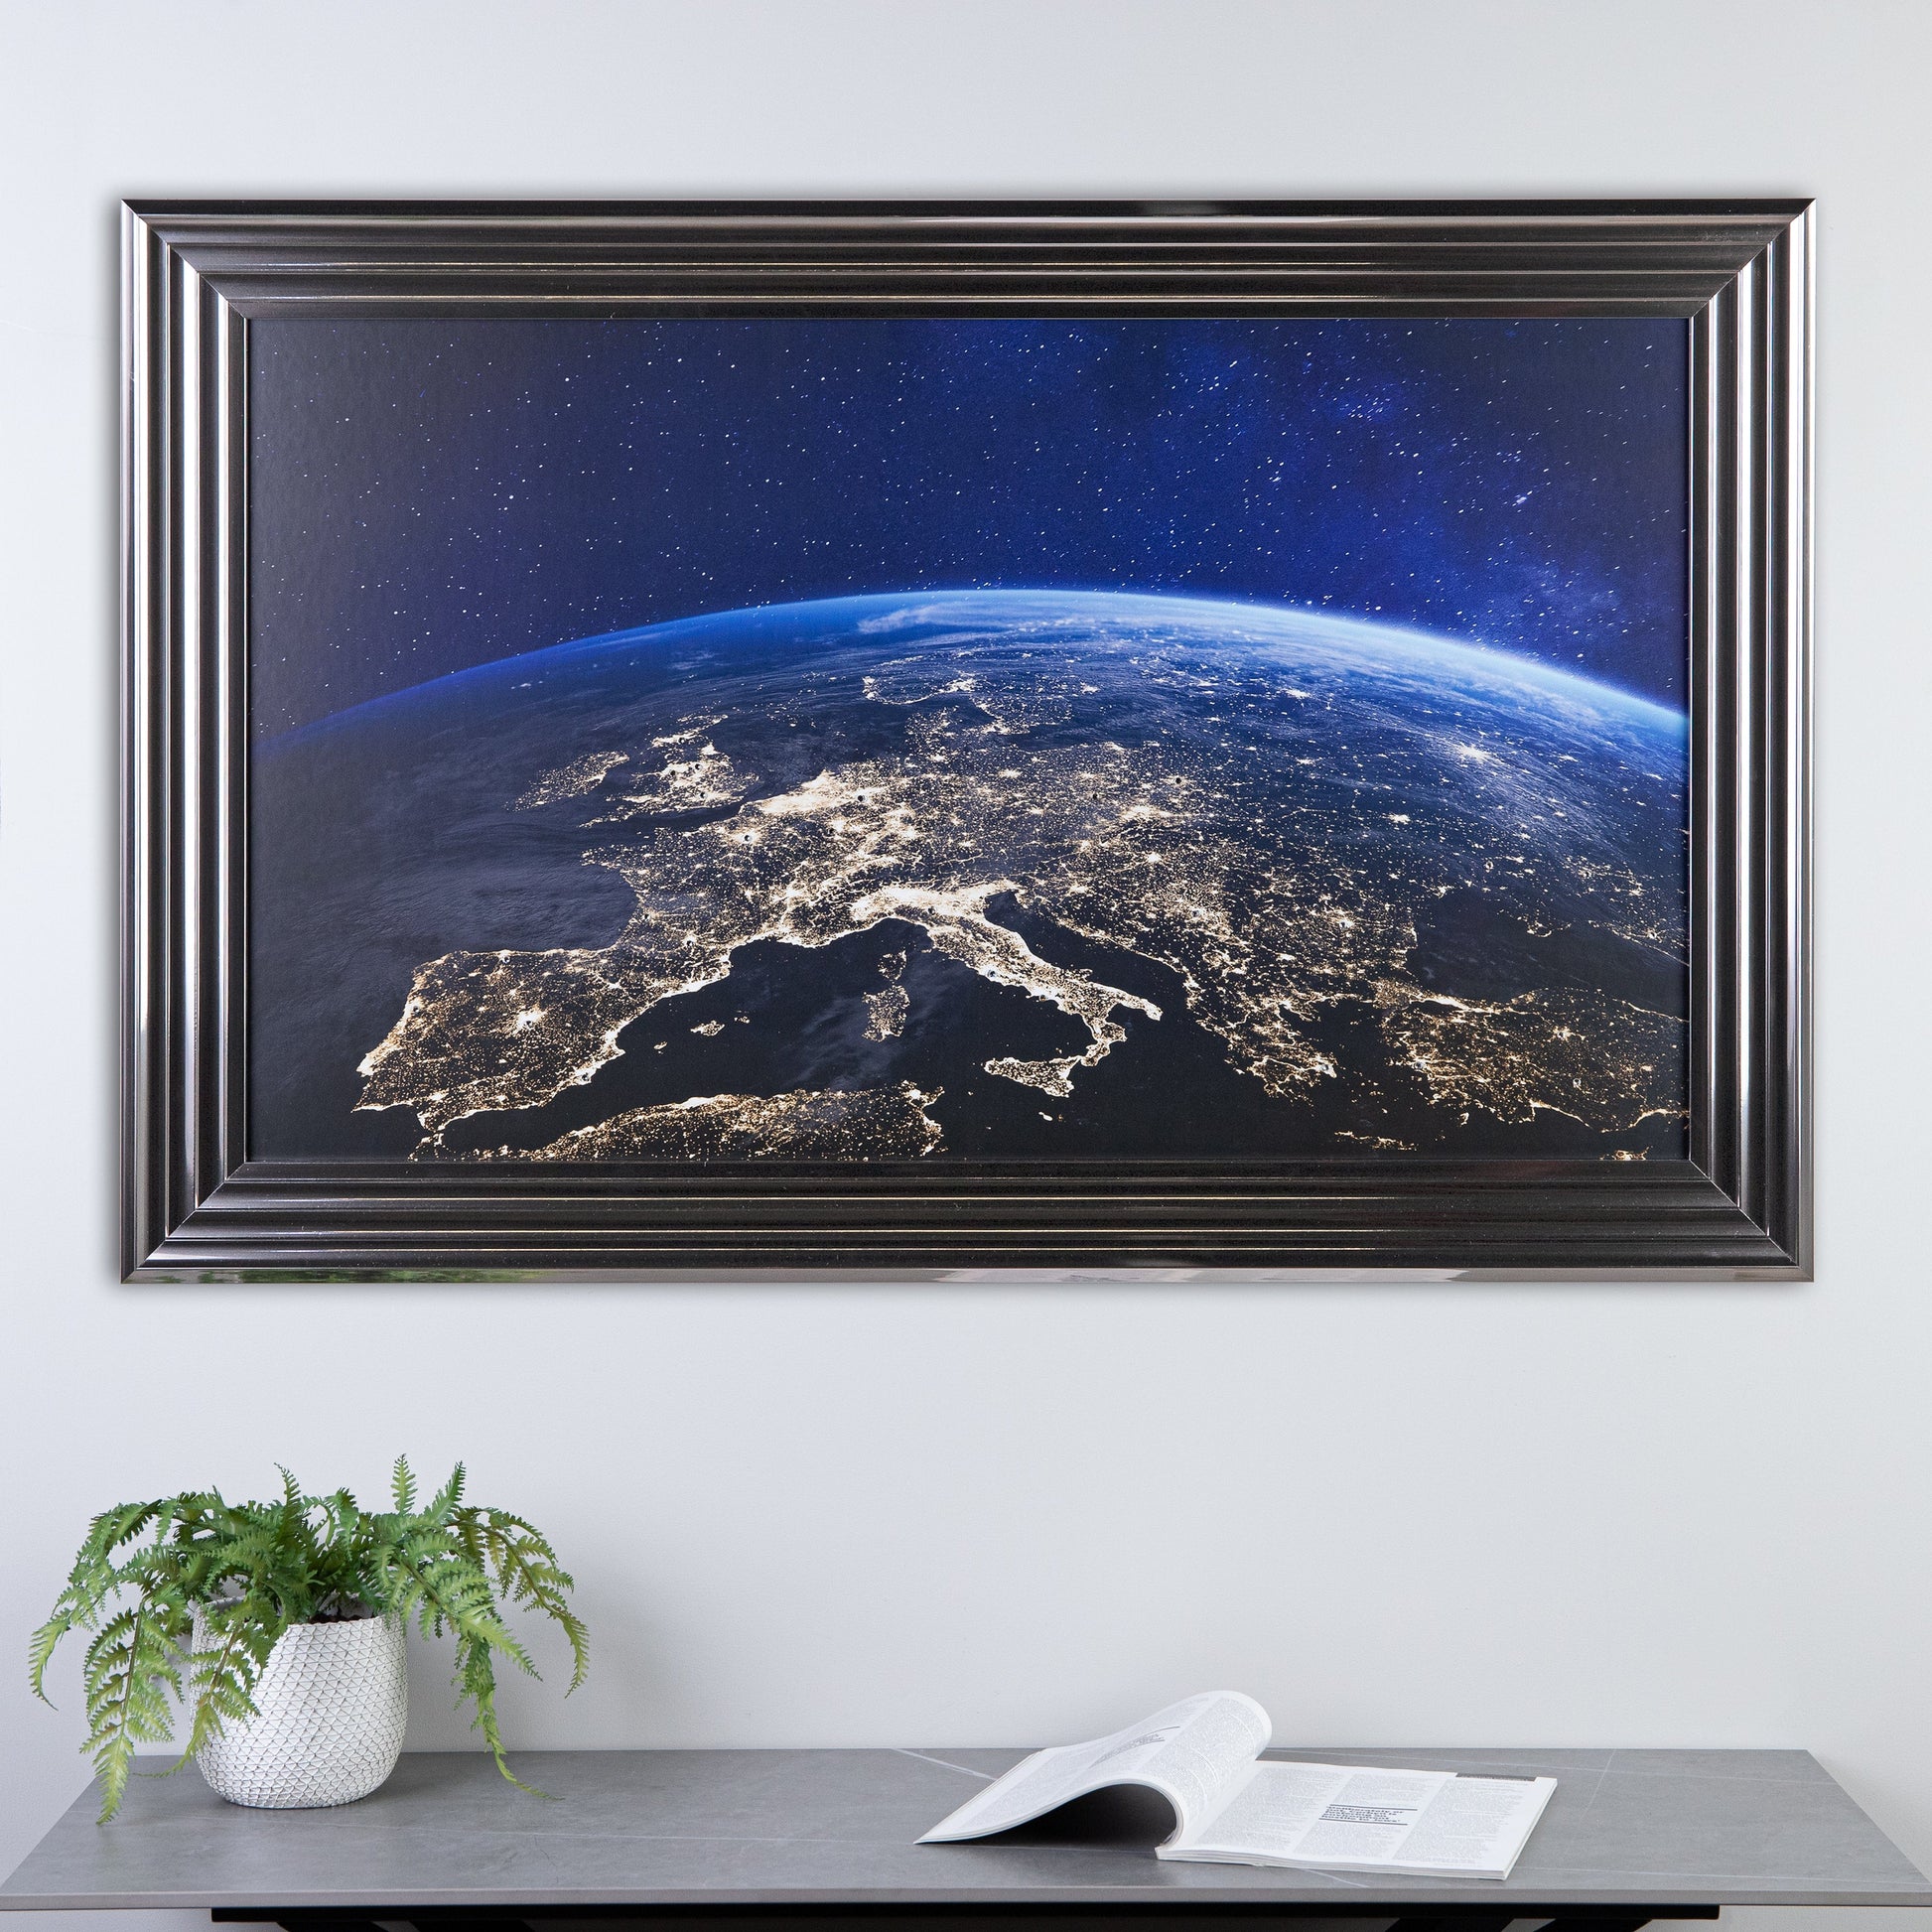 Pictures  -  Shh World From Above Framed Picture 114 X 74Cm  -  60003245